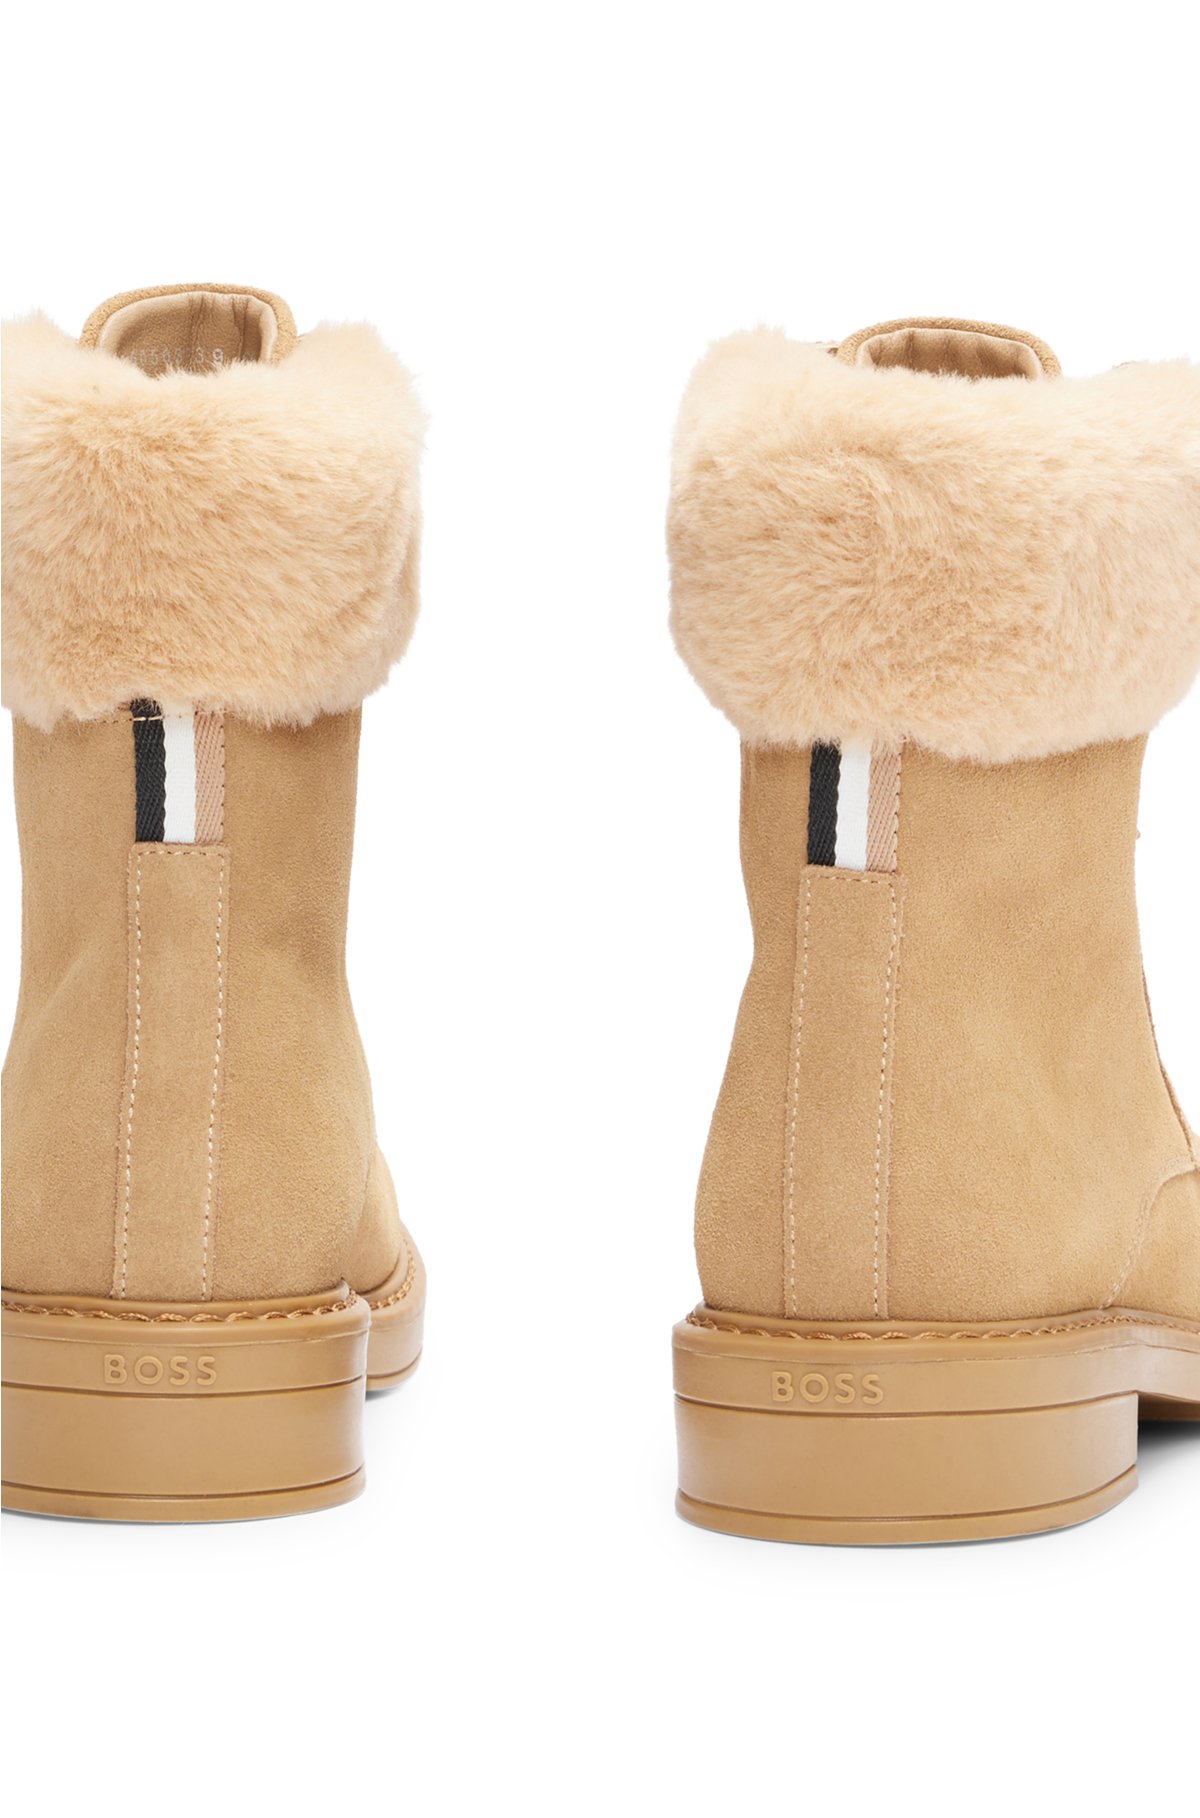 BOSS - Suede lace-up boots with faux-fur collar